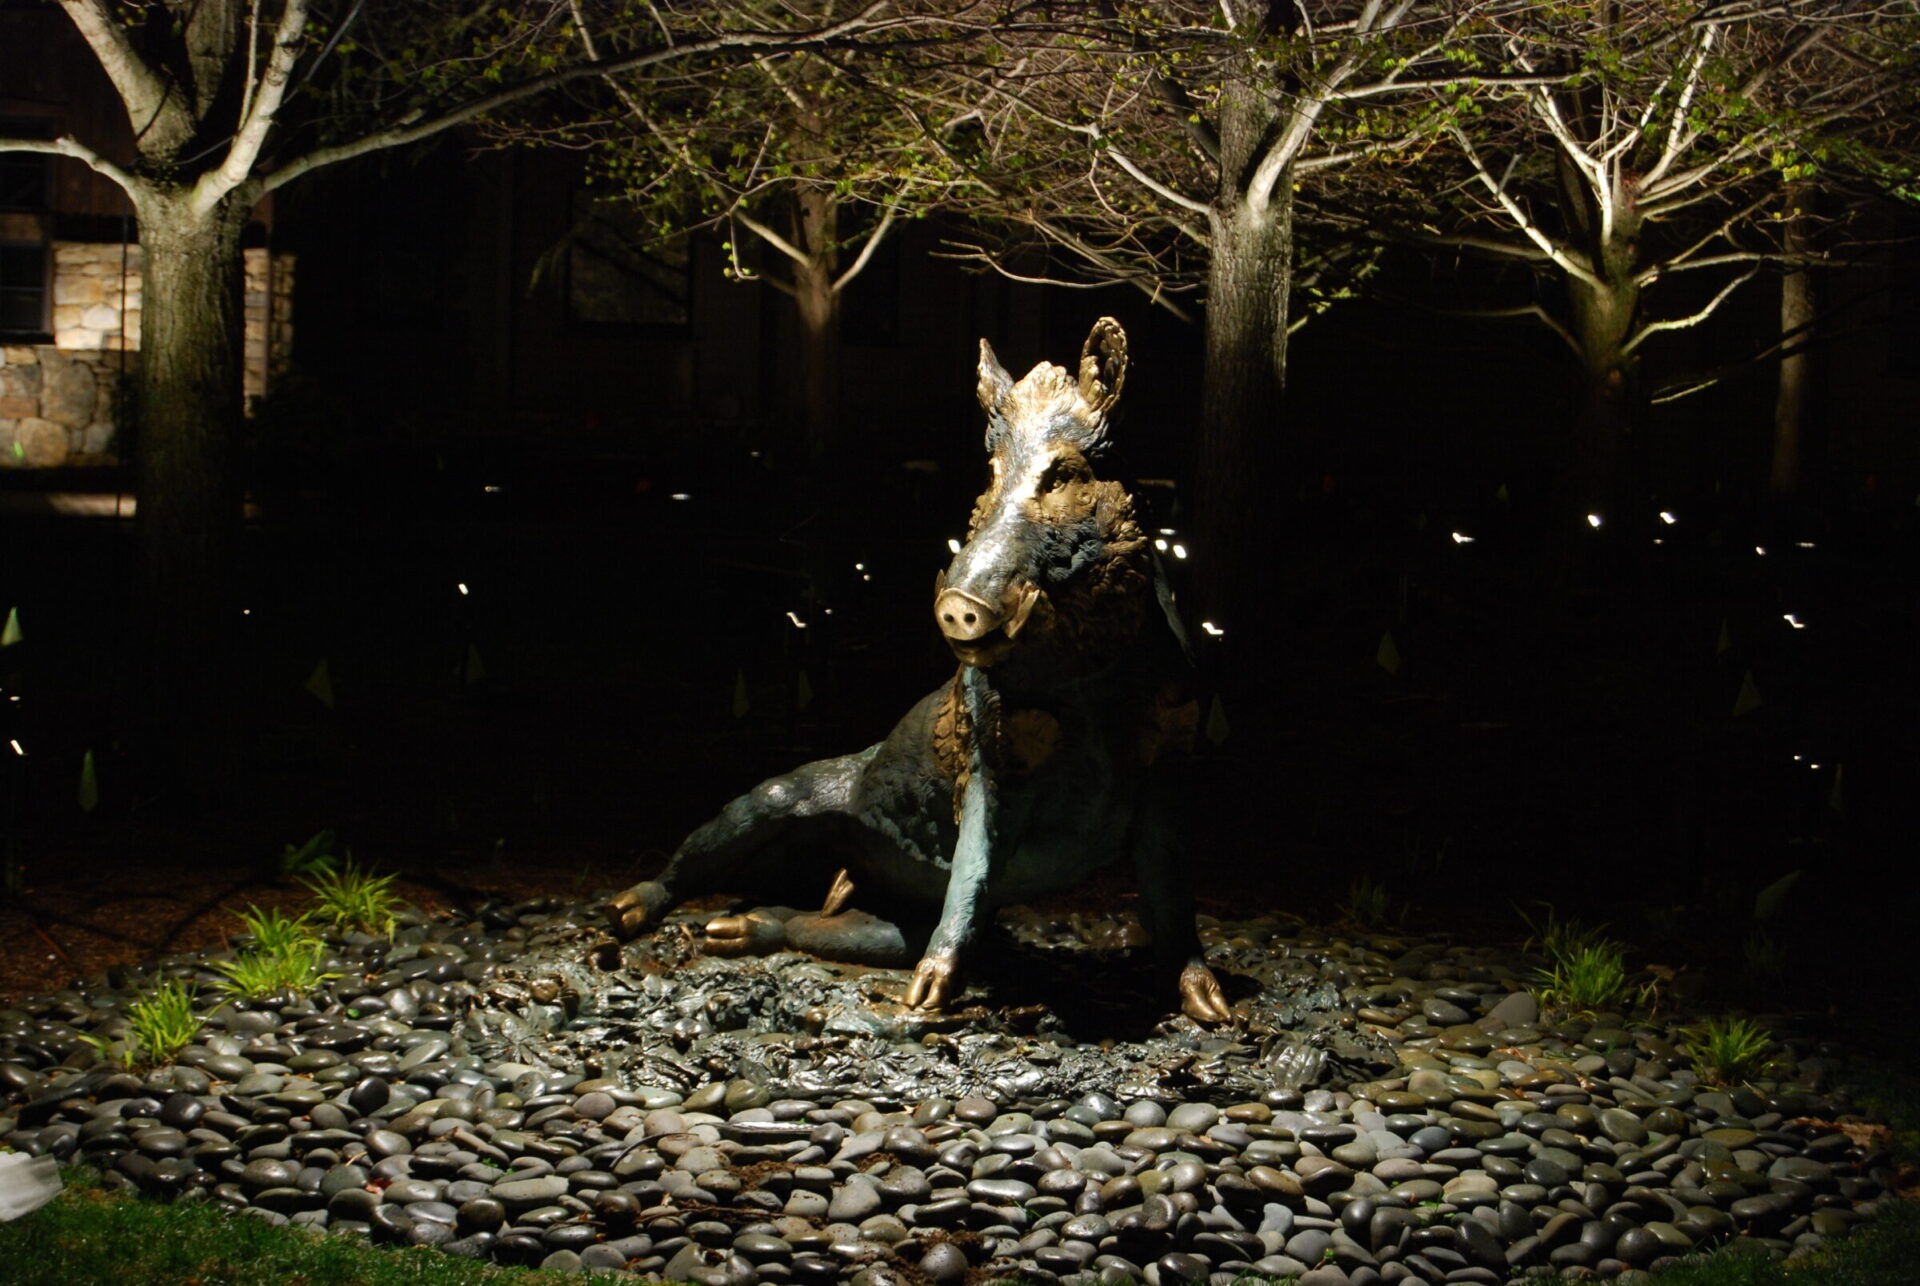 A bronze statue of a wild boar sits among smooth pebbles, illuminated at night by overhead lights, with dark trees and a building in the background.